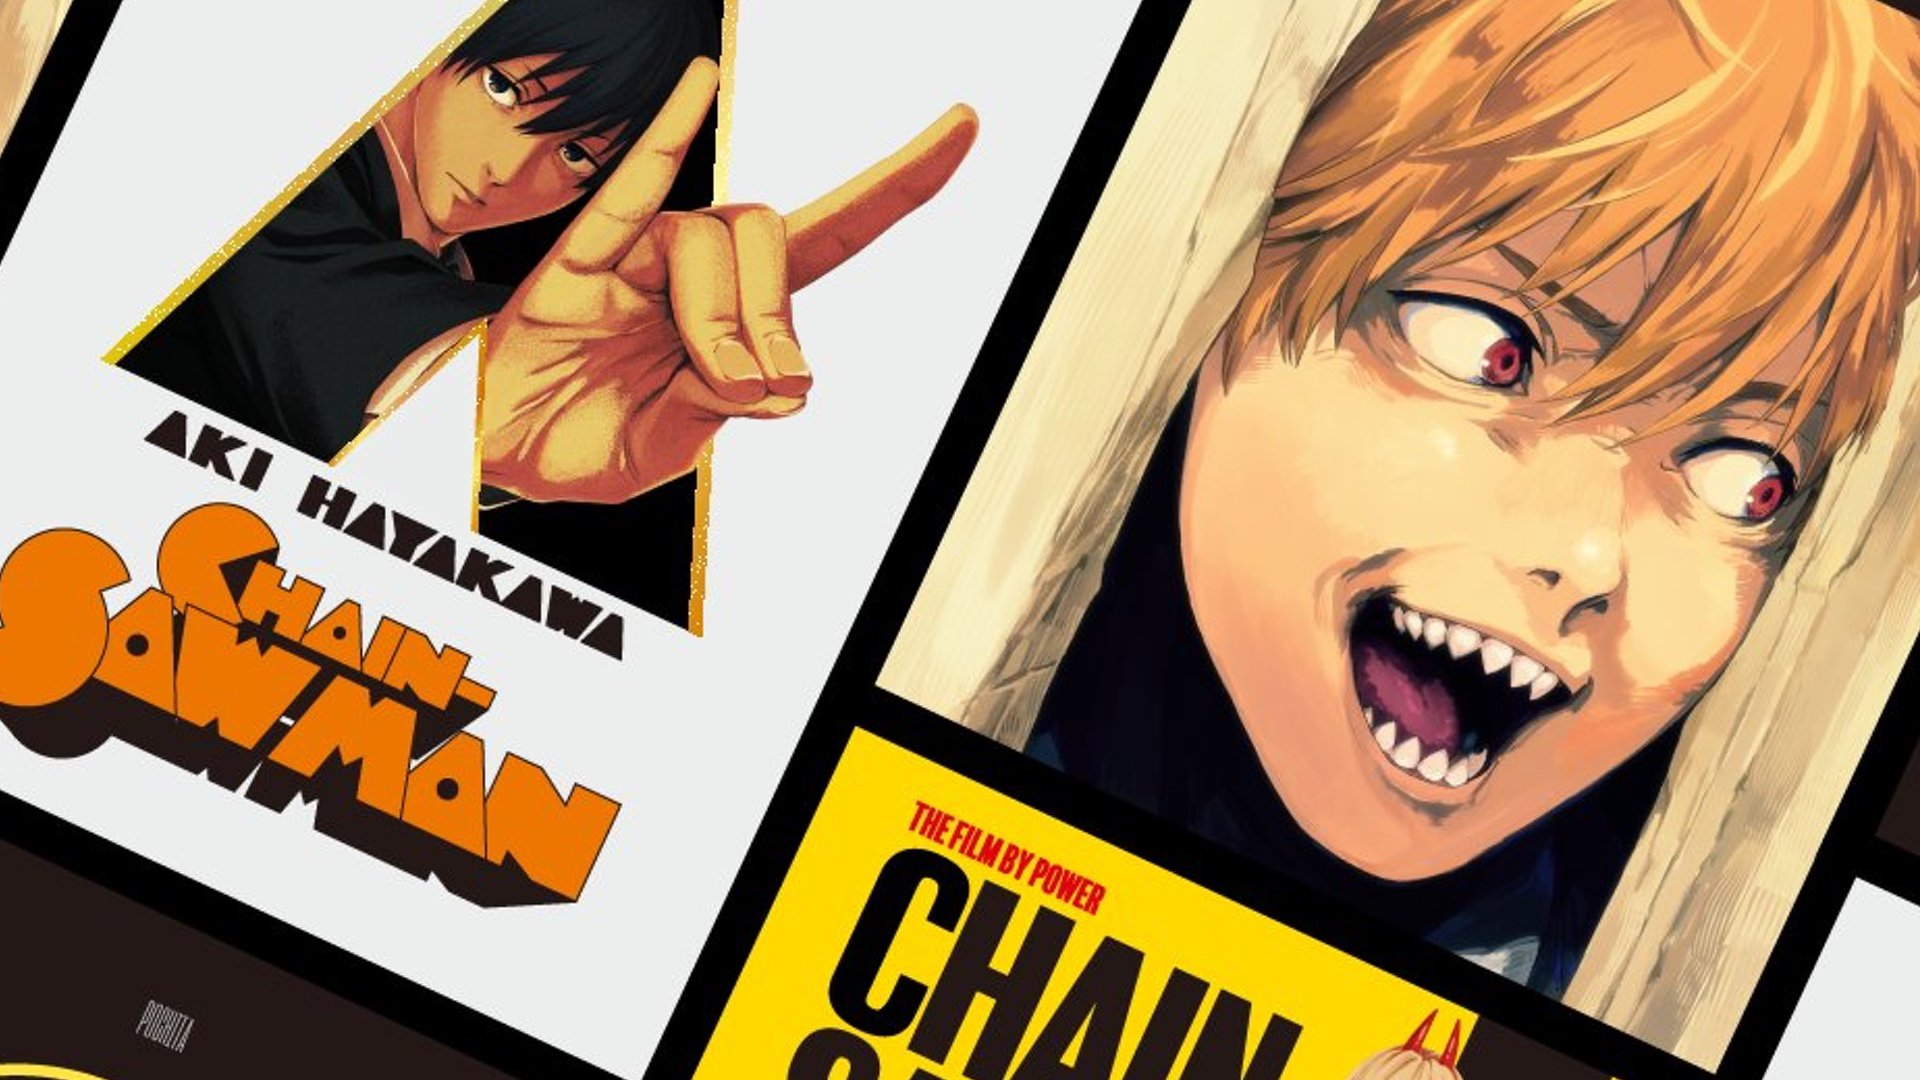 Chainsaw Man Is The Most Intense Anime I've Seen In Years, And You